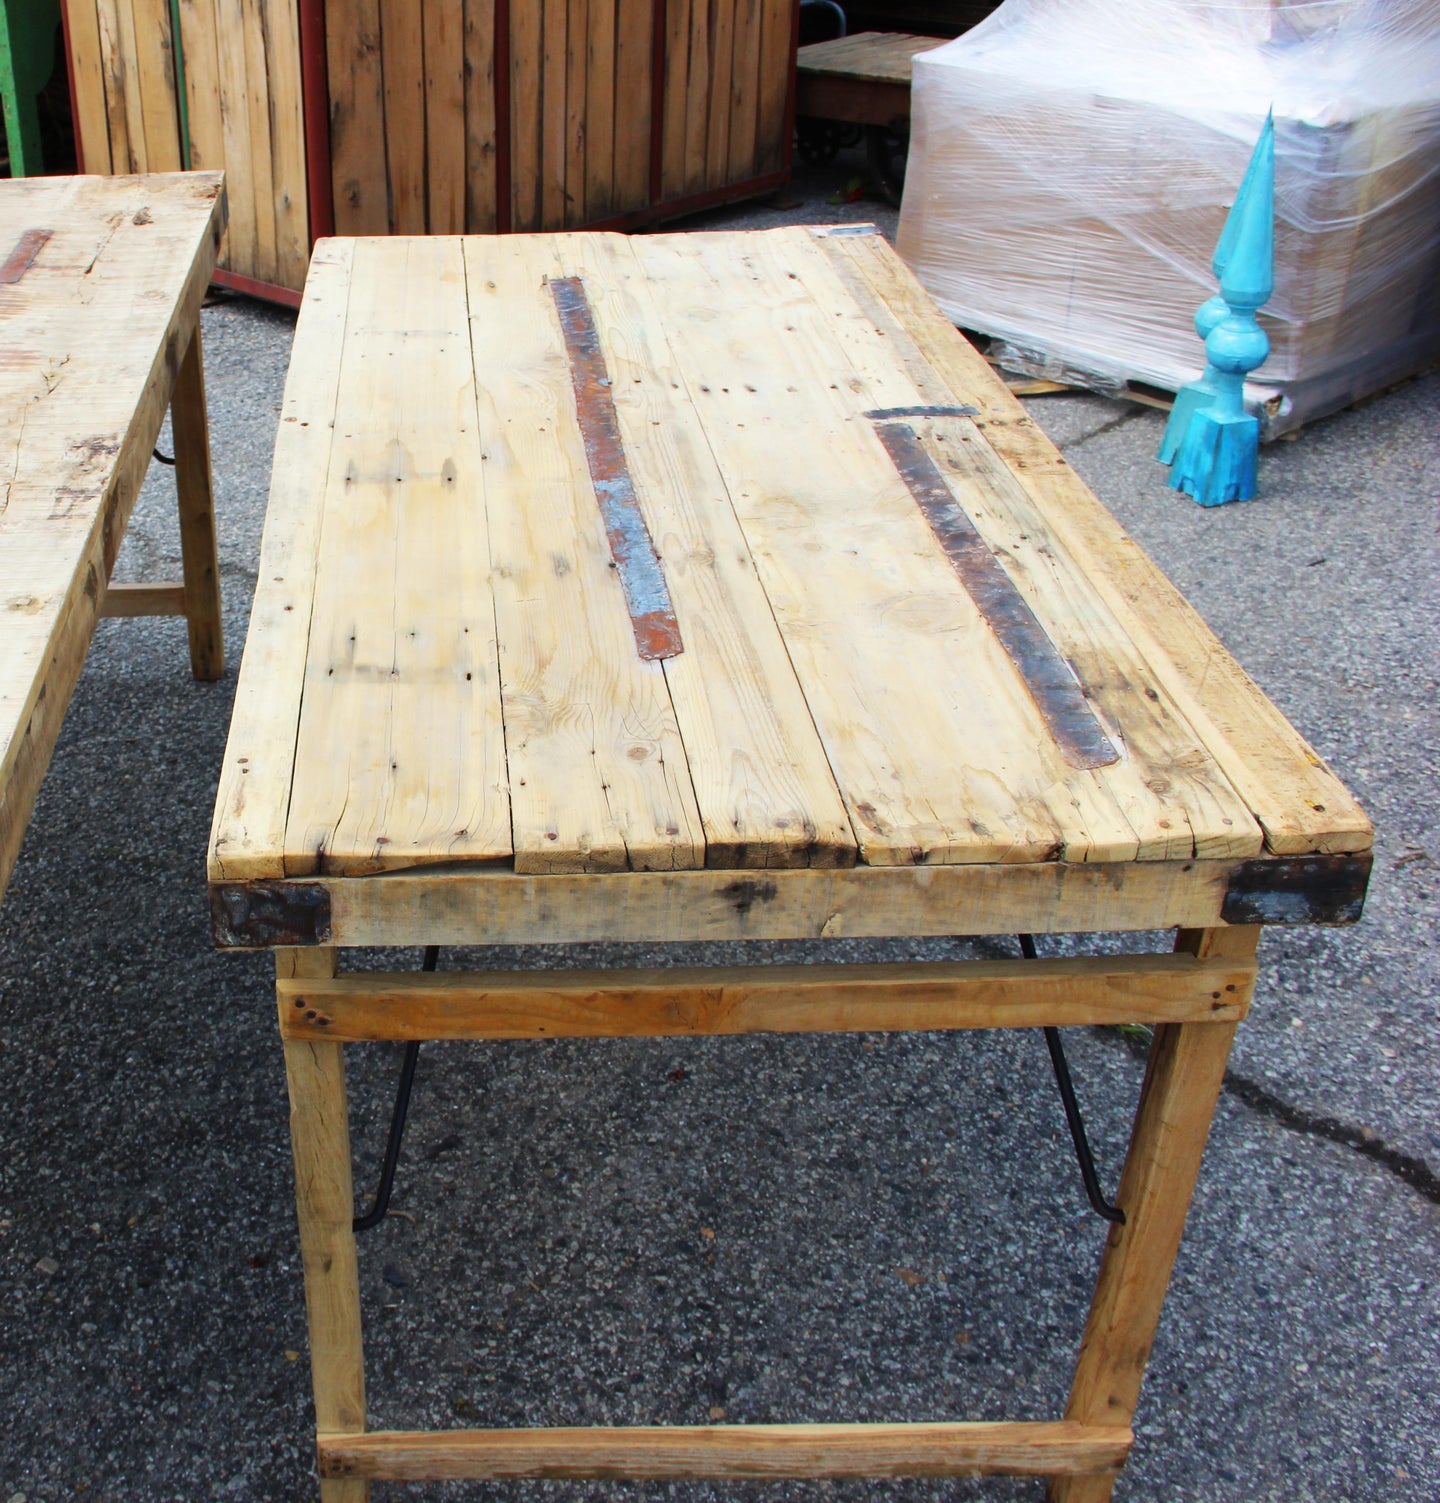 8 foot Wood Banquet Table -Bleached